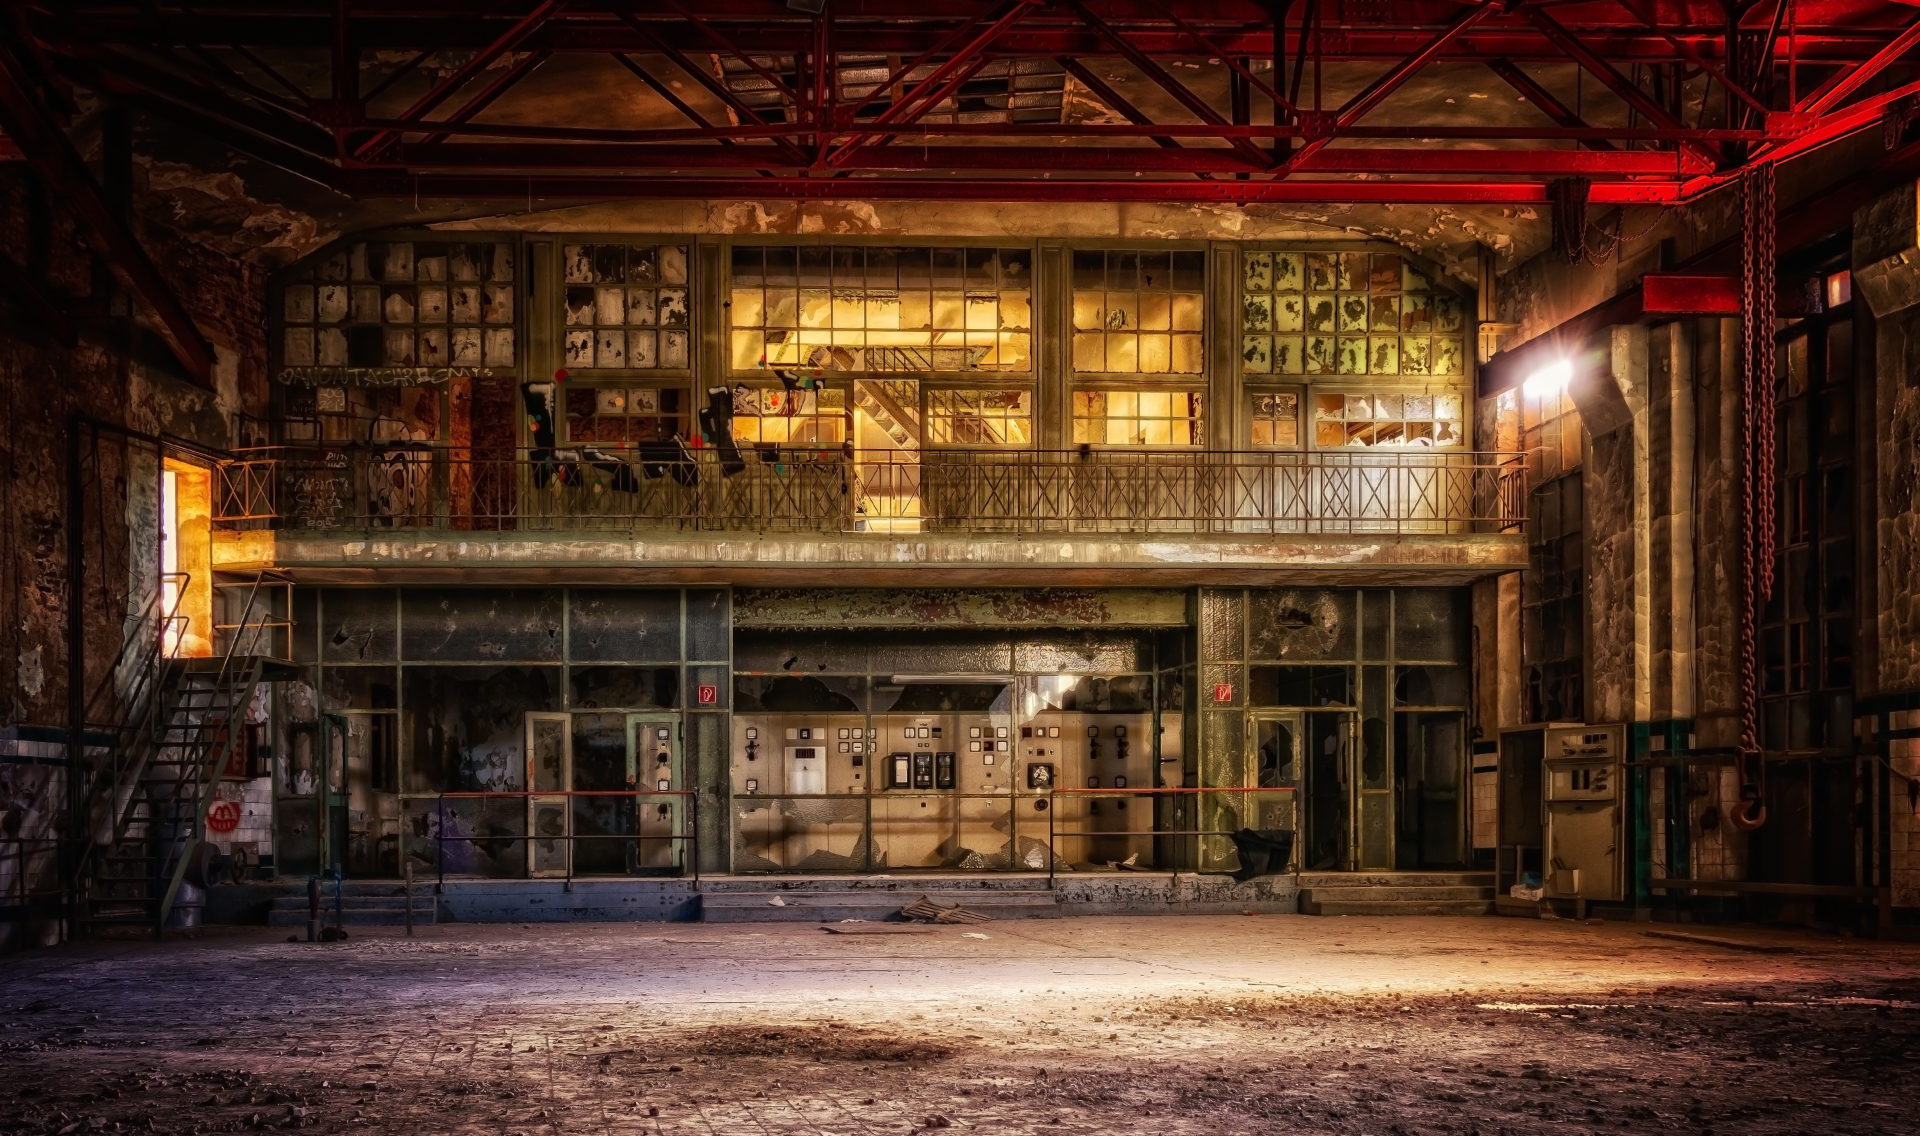 INT. ABANDONED FACTORY 1 – DAY